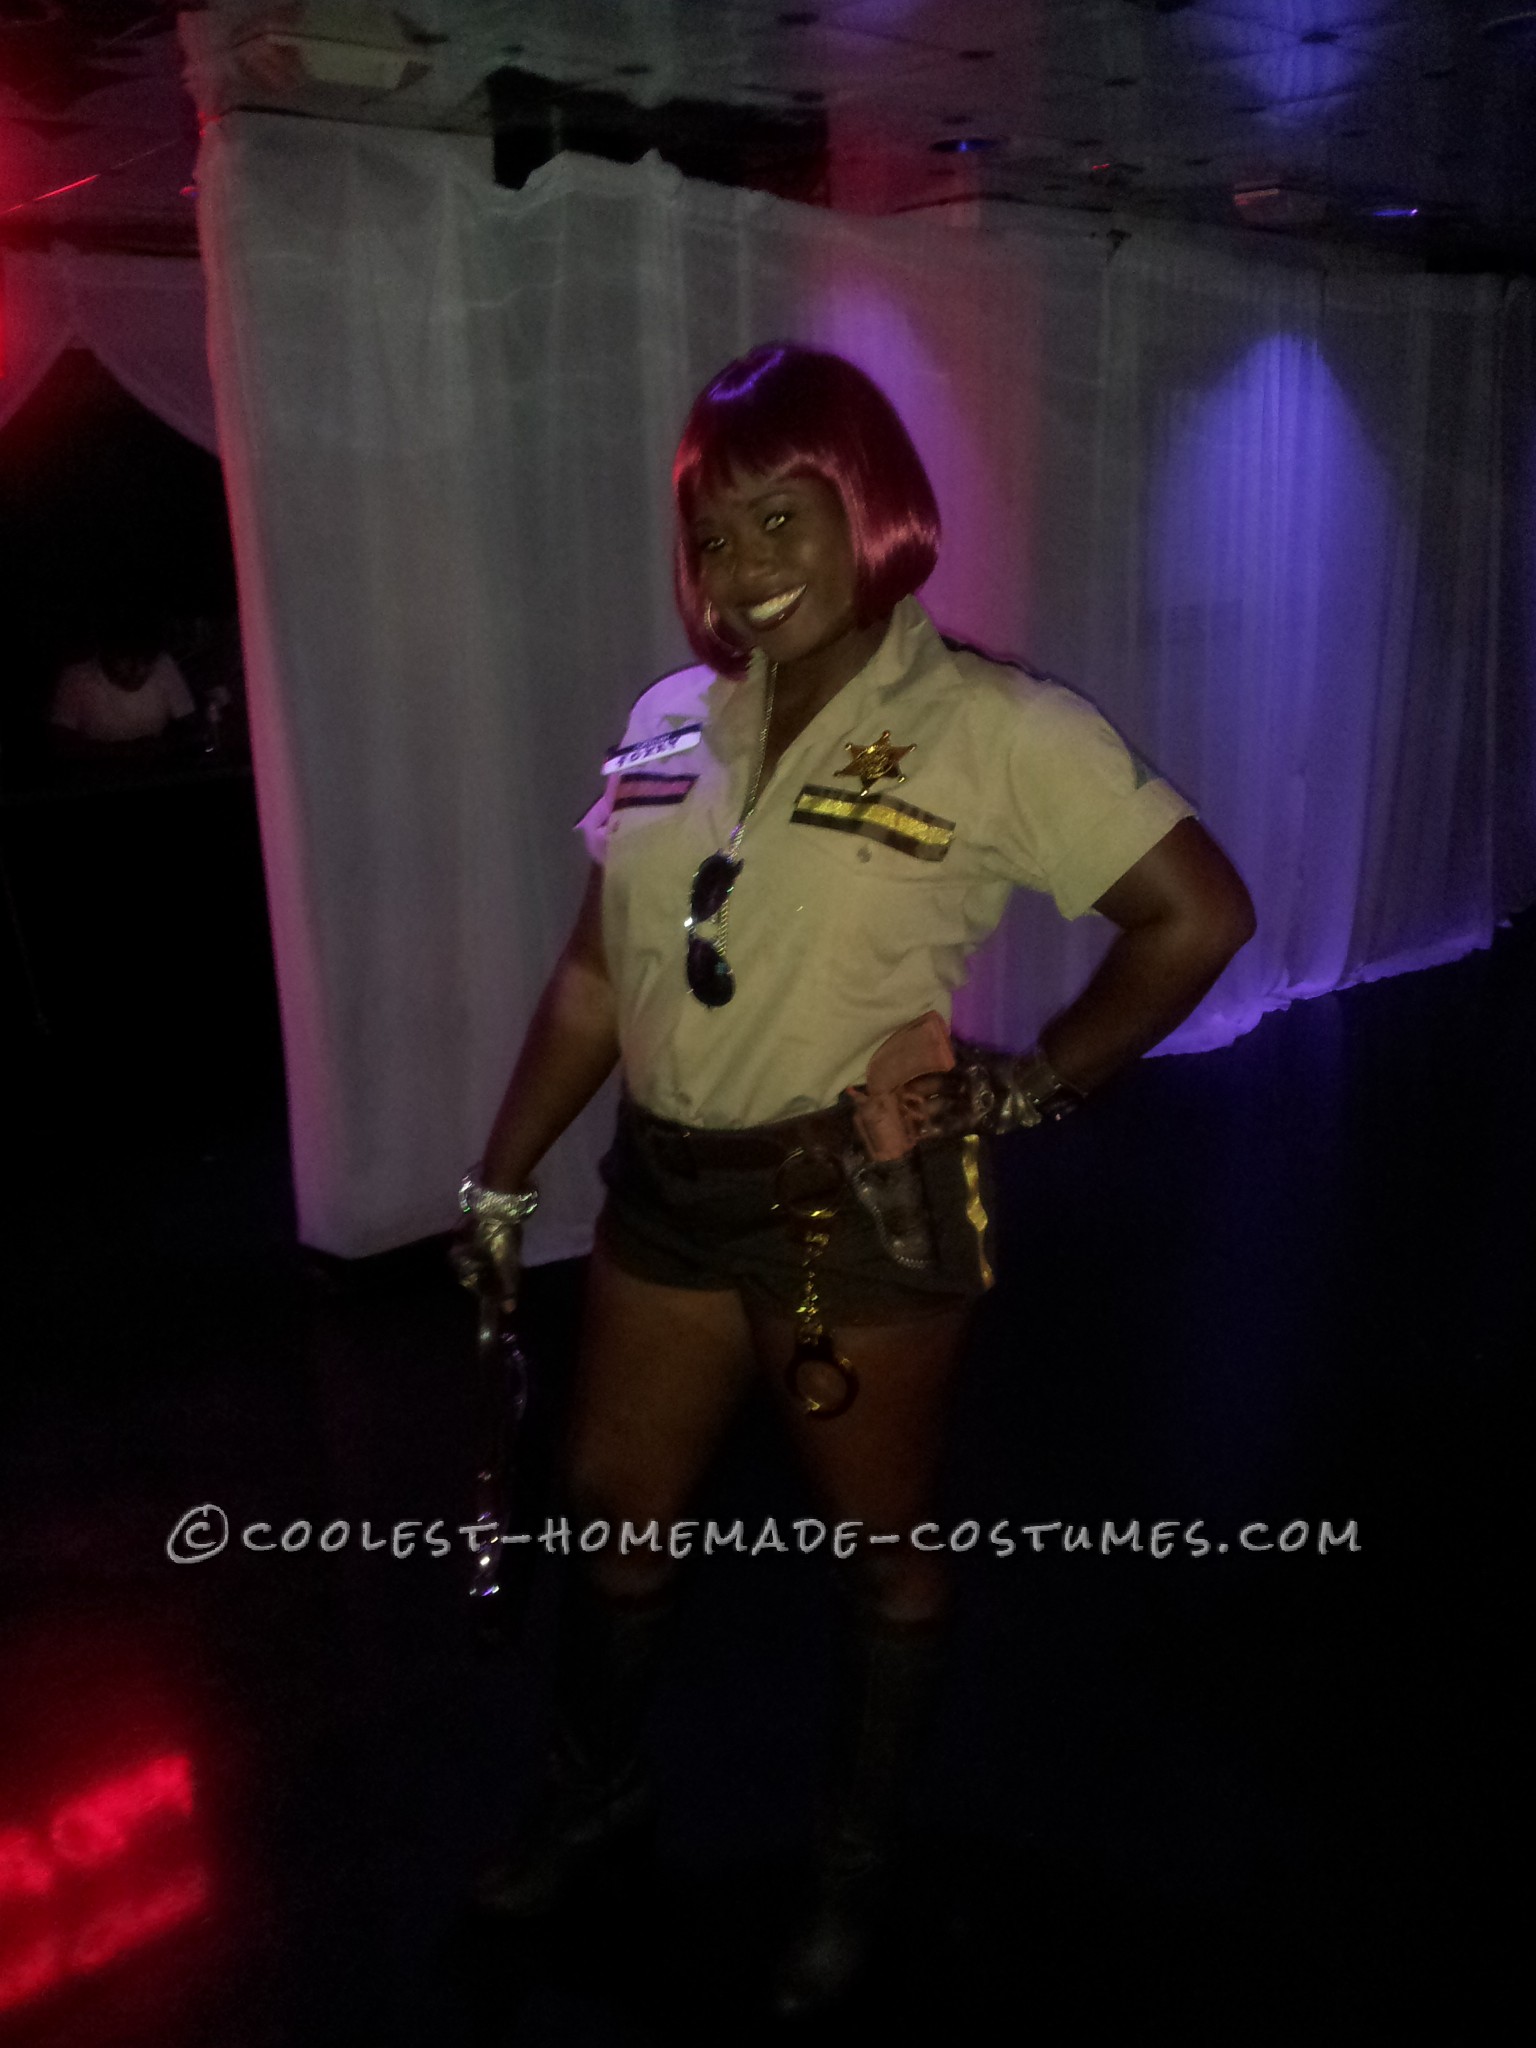 This costume started as a sheriff costume for a walking dead party. I decided to turn it into a sexy version for a club party. I bought the shirt and